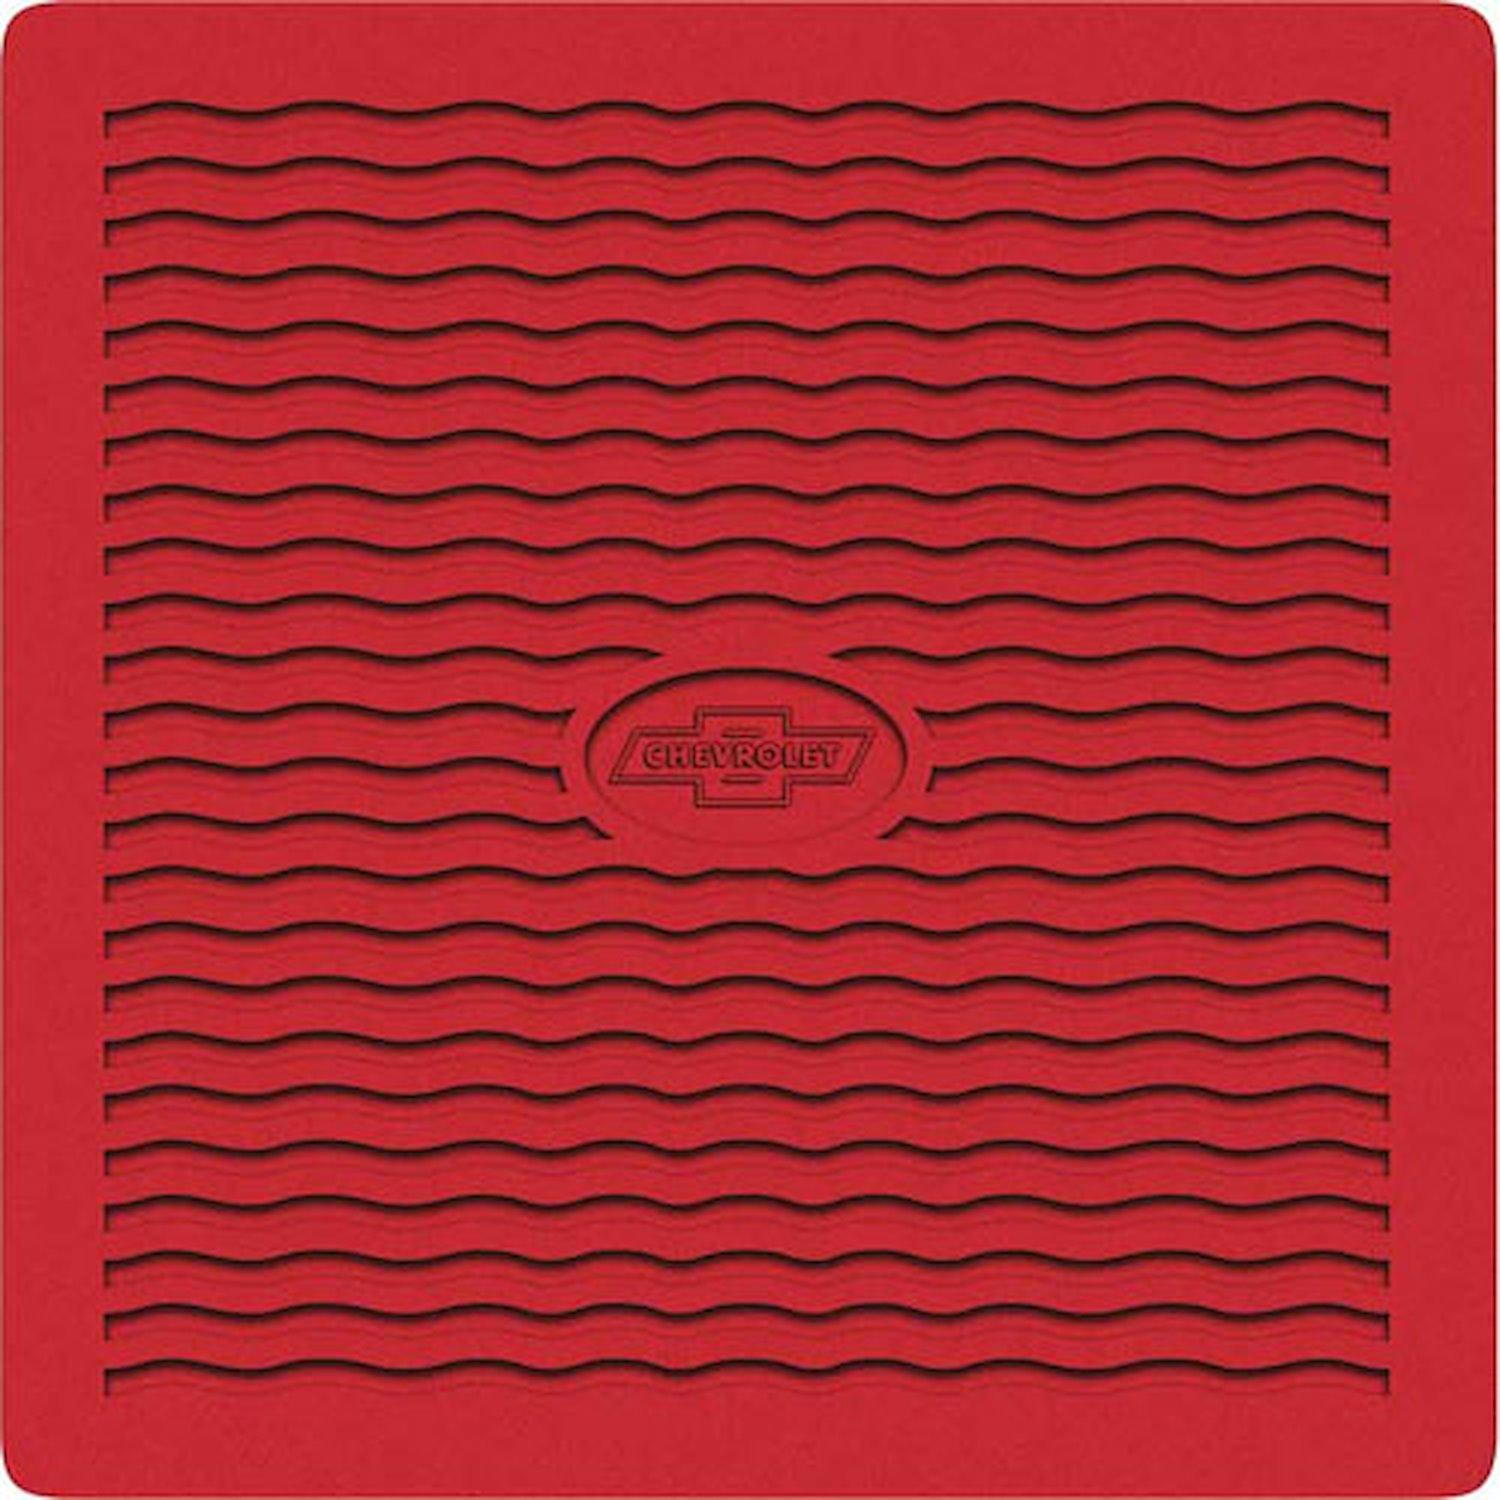 1955-56 CHEVY FACTORY ACCESSORY FLOOR MATS - RED